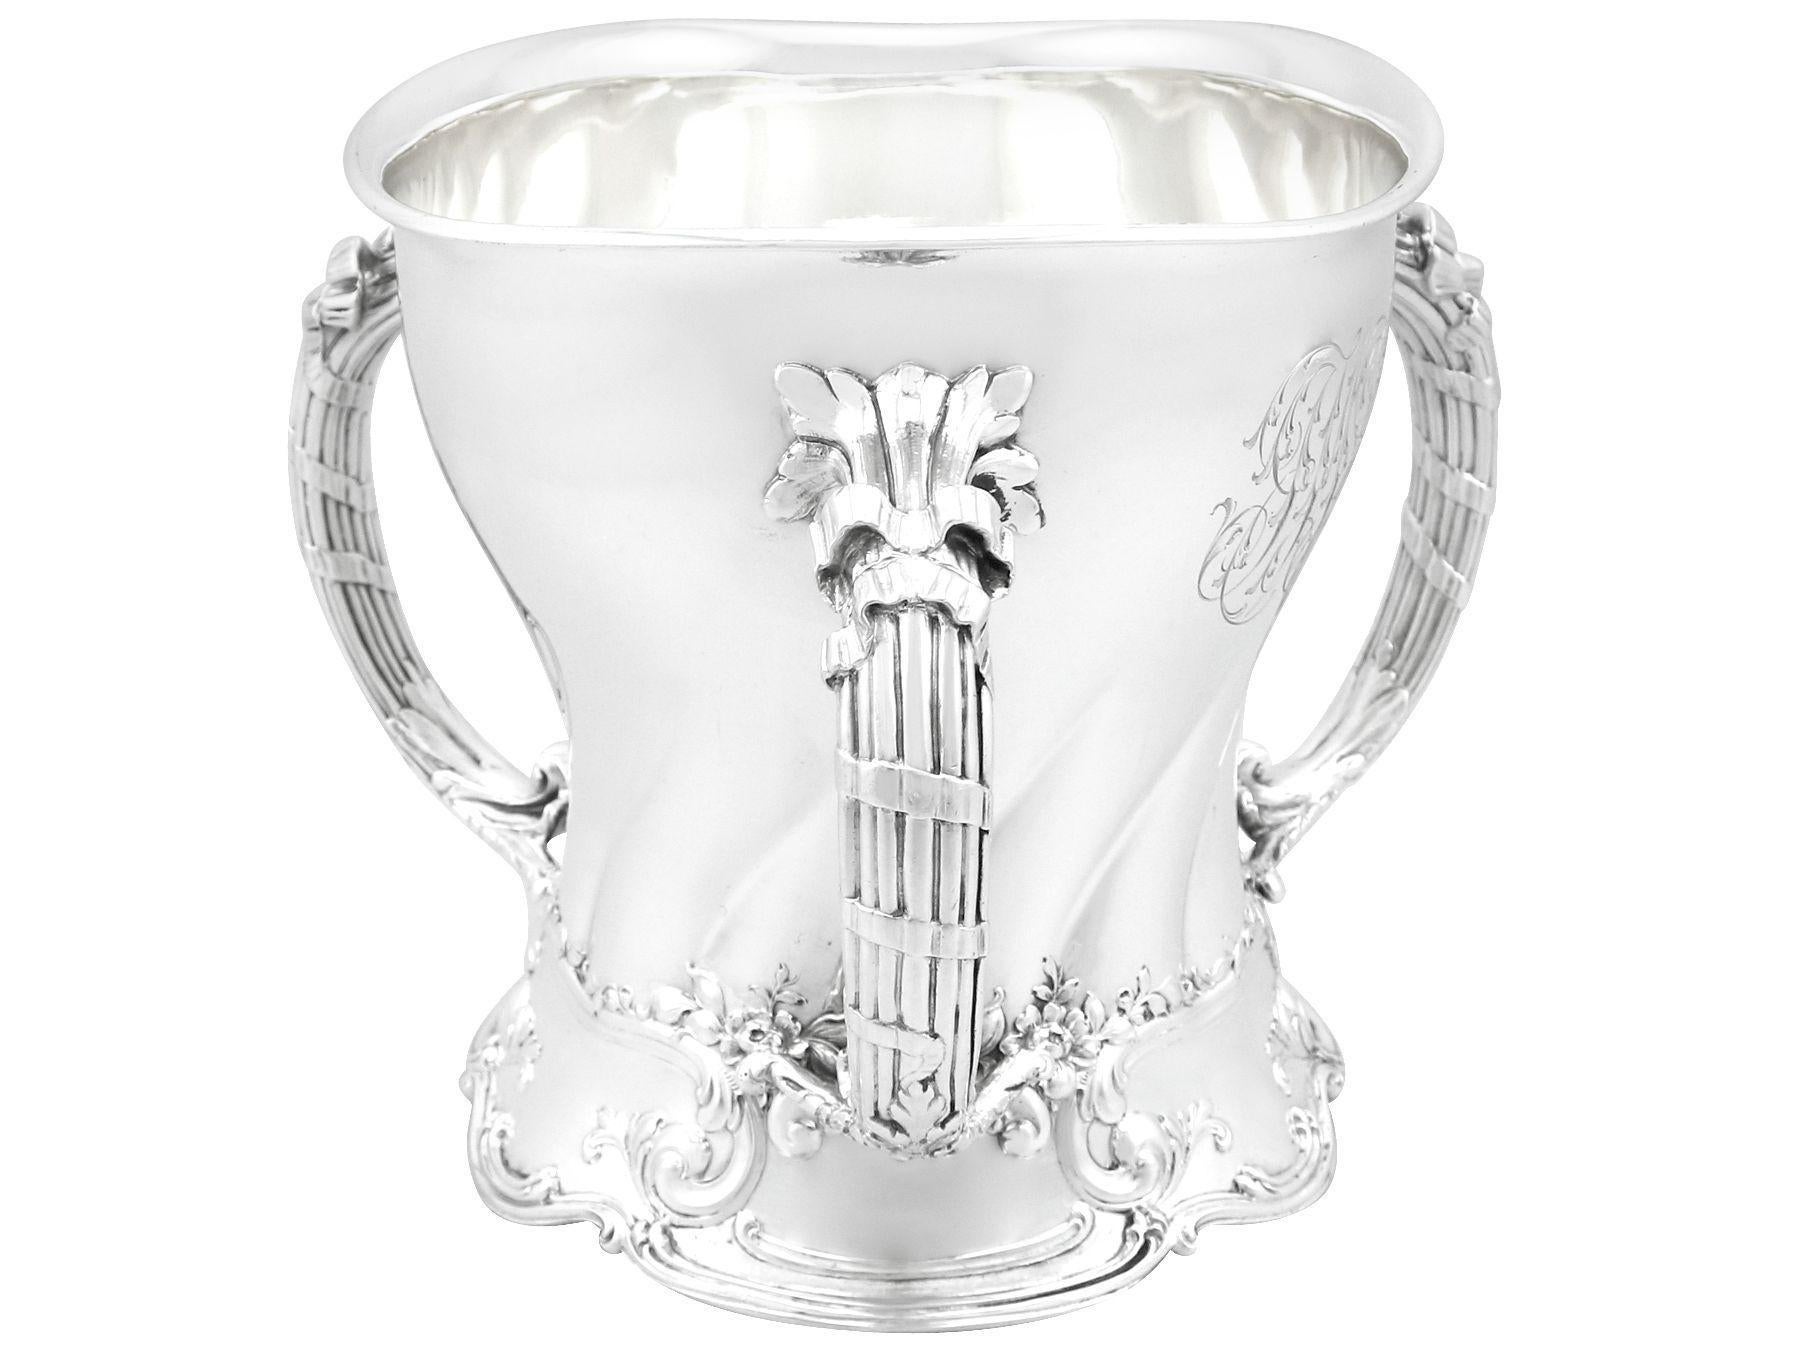 An exceptional, fine and impressive antique American sterling silver tyg presentation / champagne cup in the Art Nouveau style; an addition to our ornamental silverware collection.

This exceptional antique American sterling silver tyg